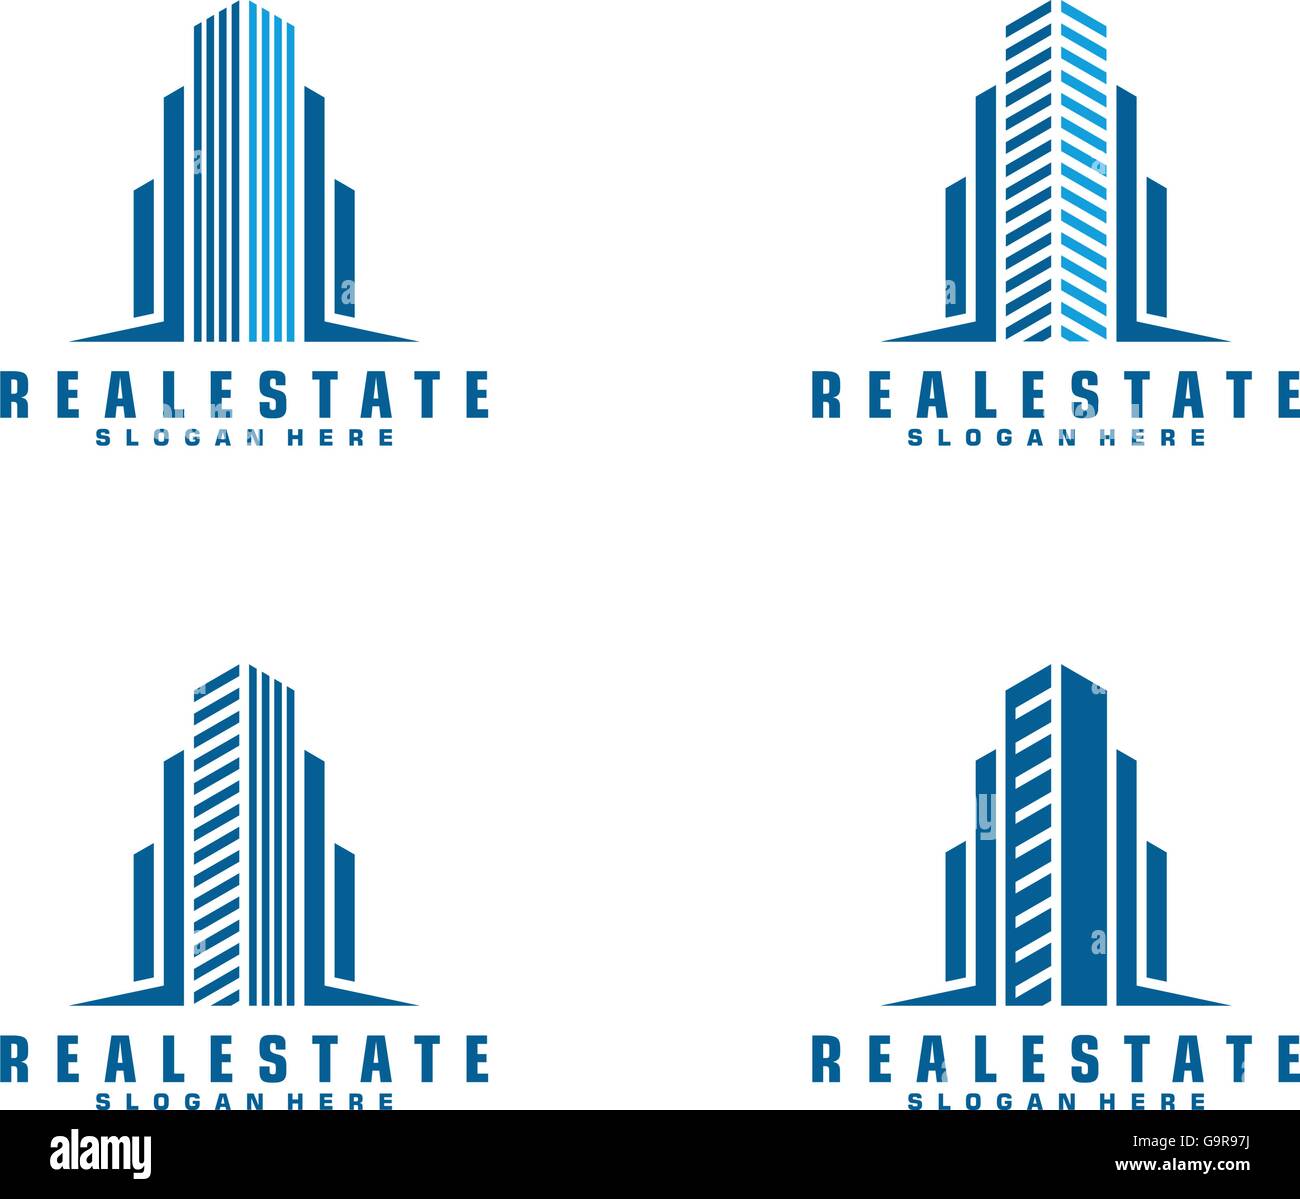 Download real estate vector logo design, abstract building with ...